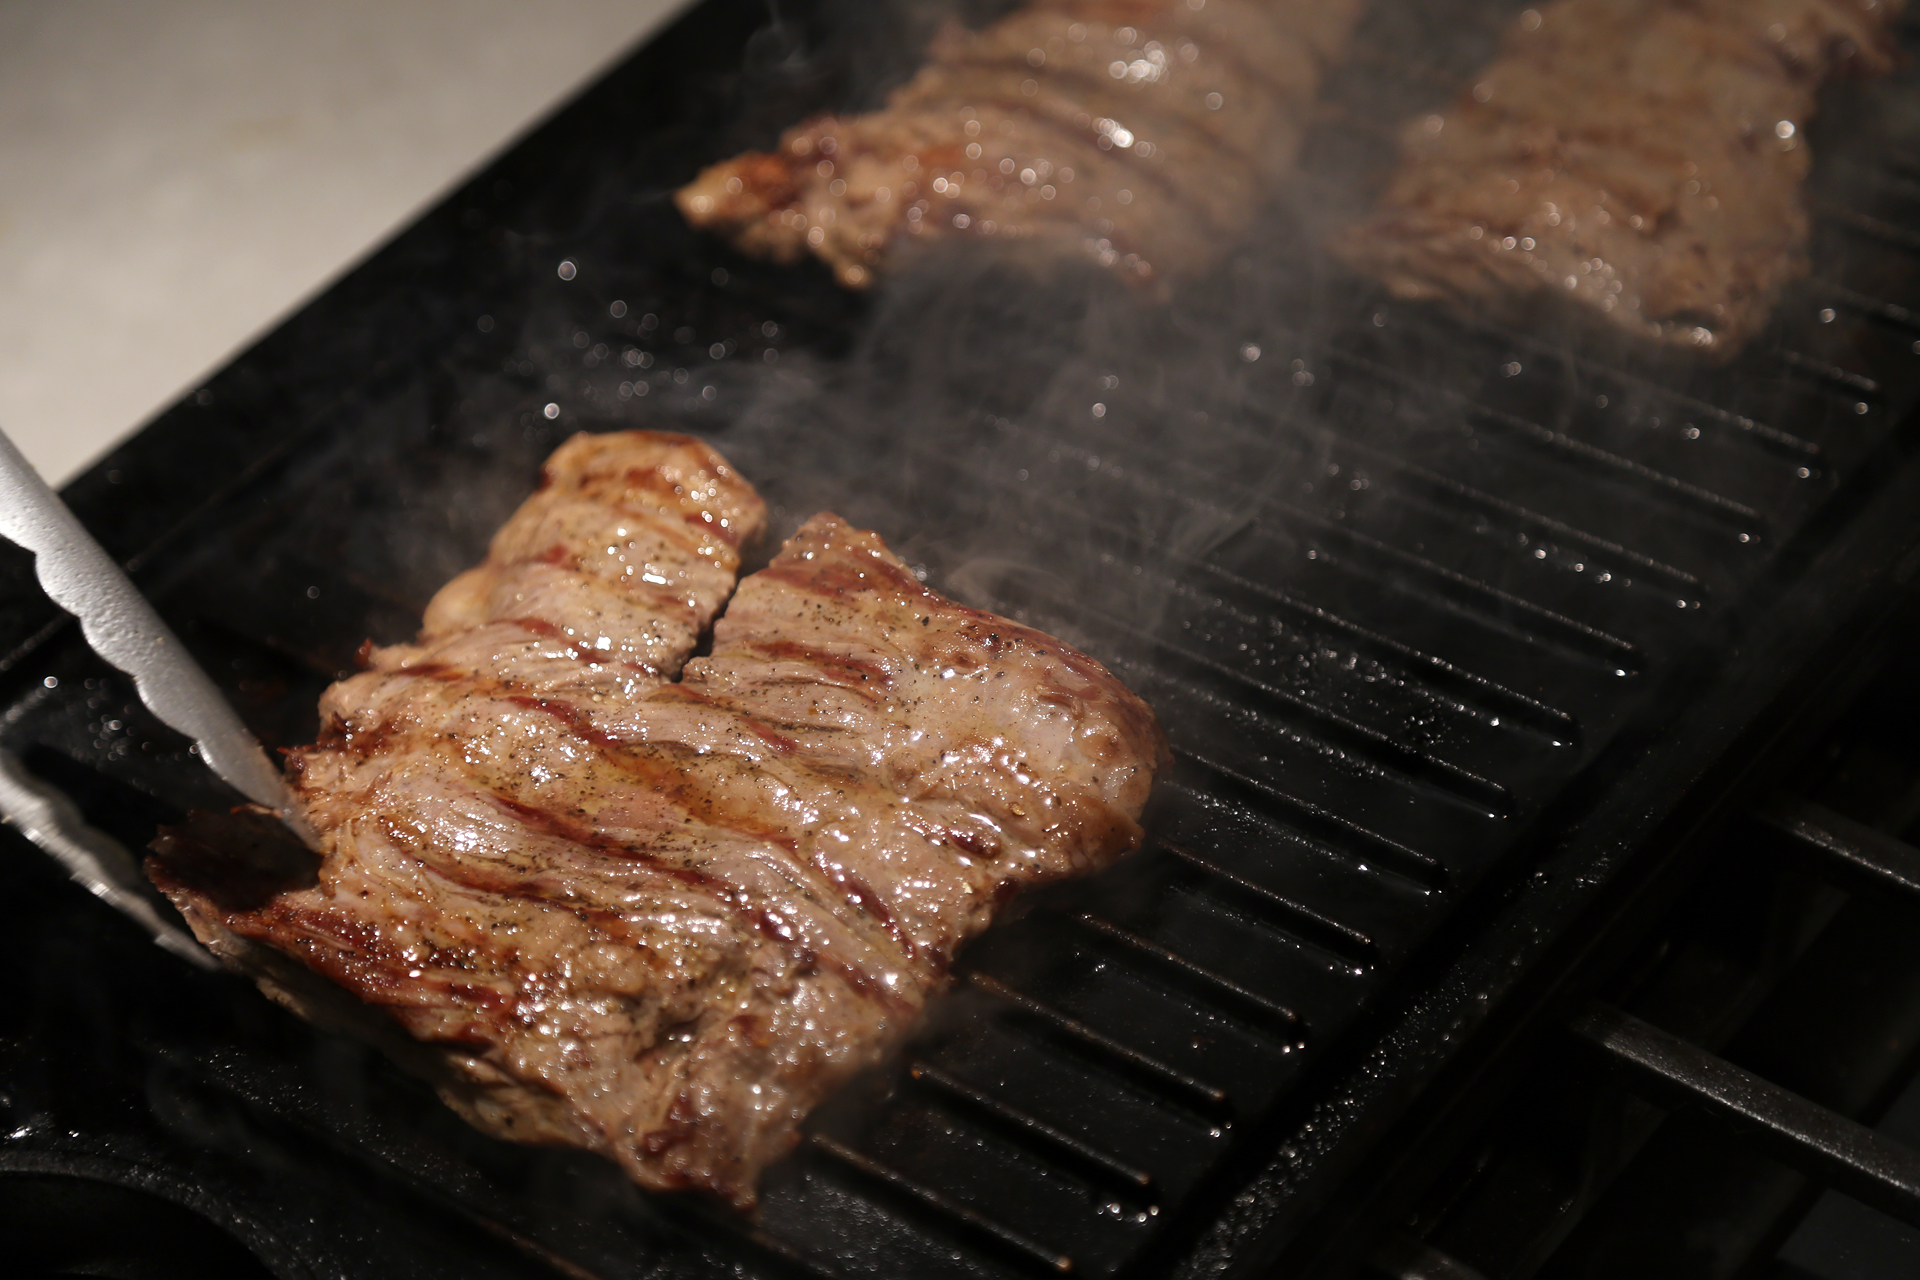 Brush the grill grate or stovetop grill with oil. Sear the steak, turning, until nicely seared on both sides and medium-rare. 